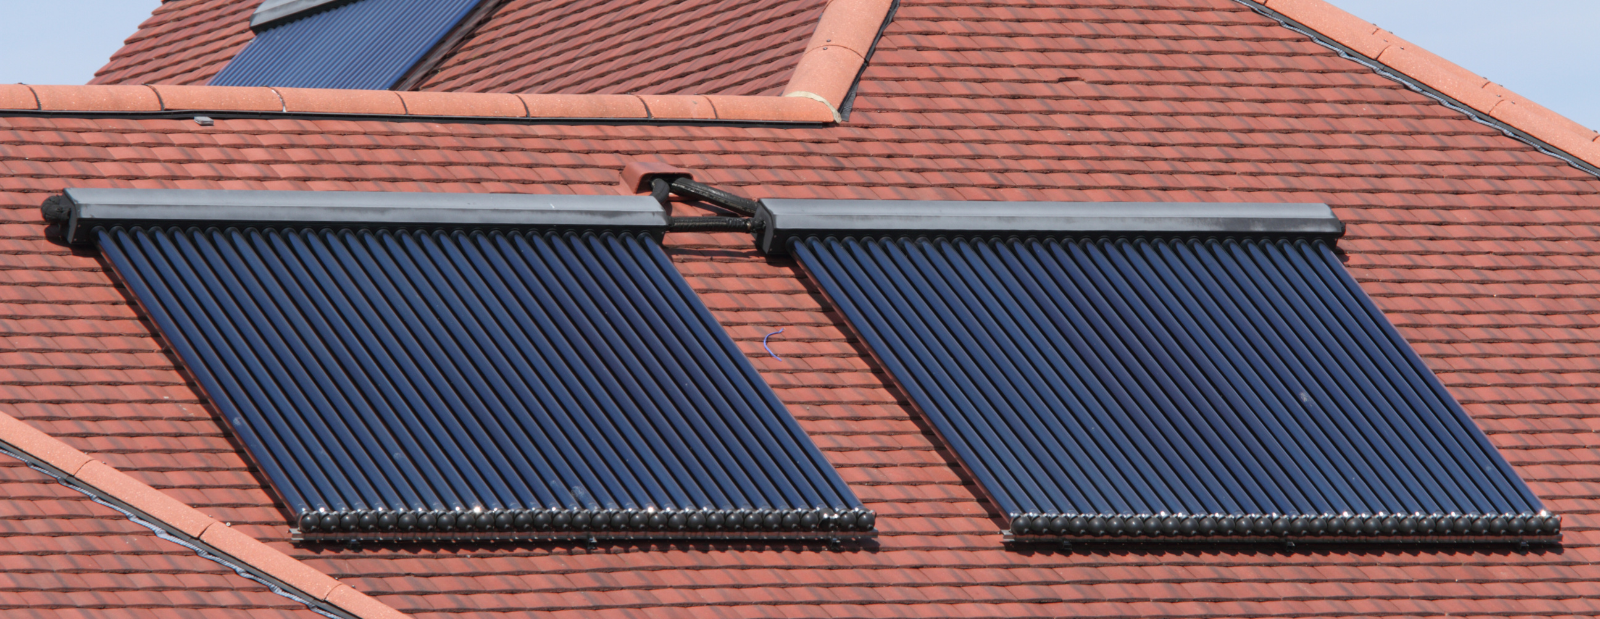 Peter Brown Solar Water Heating Services in Harrow